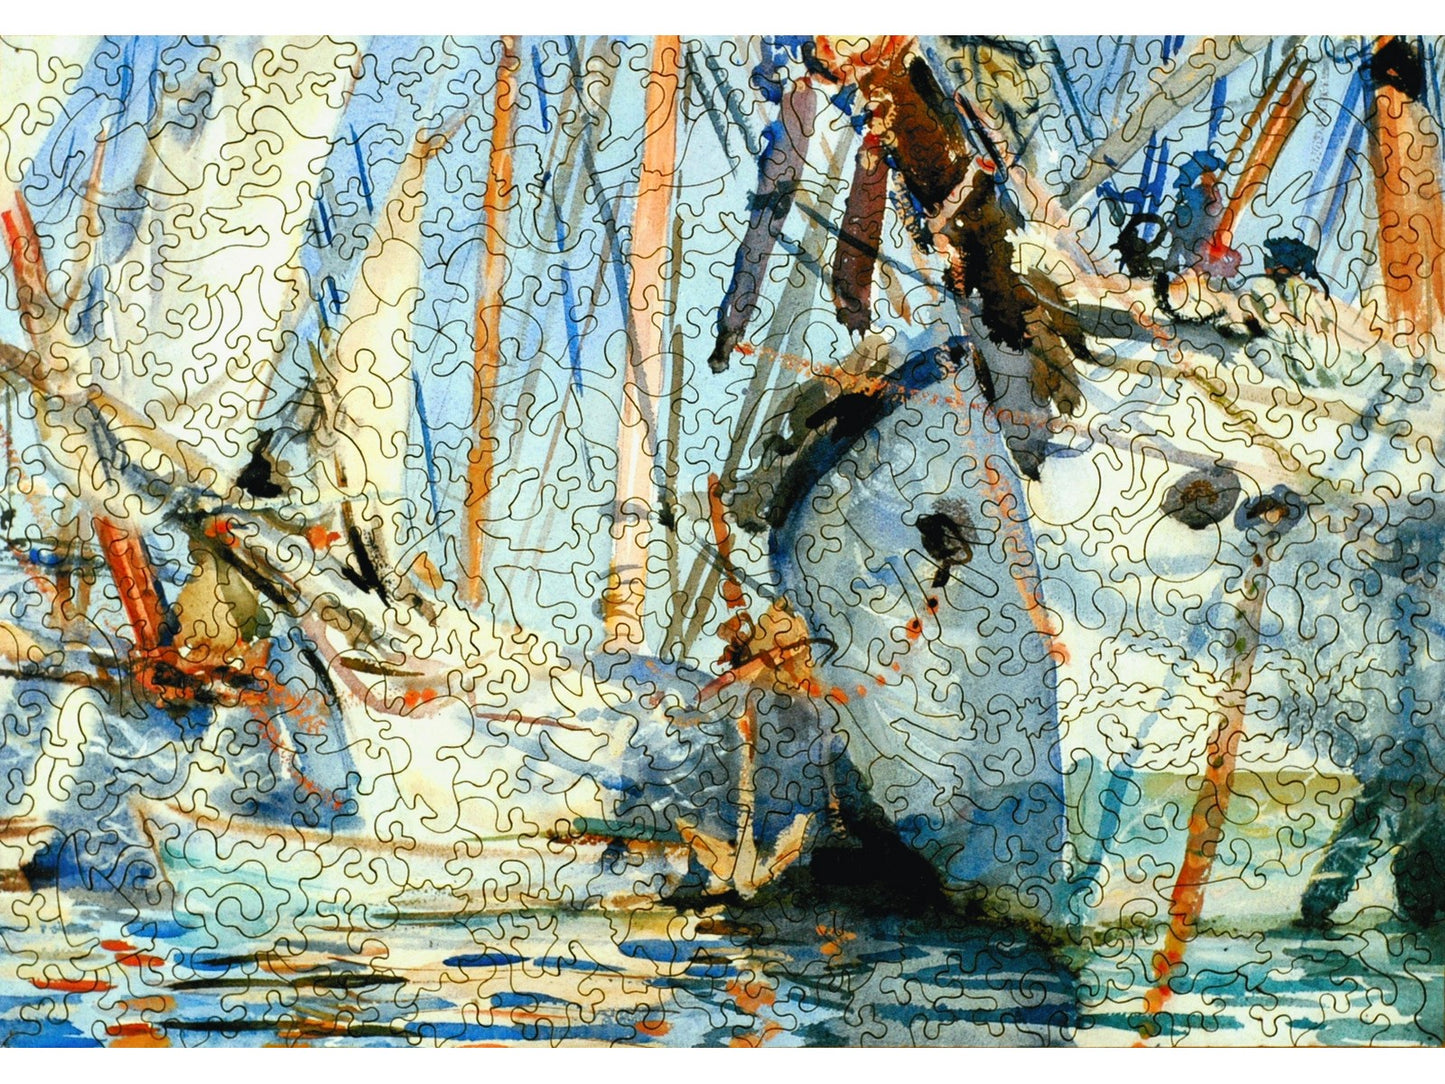 The front of the puzzle, White Ships, which shows several large sailboats in a marina.